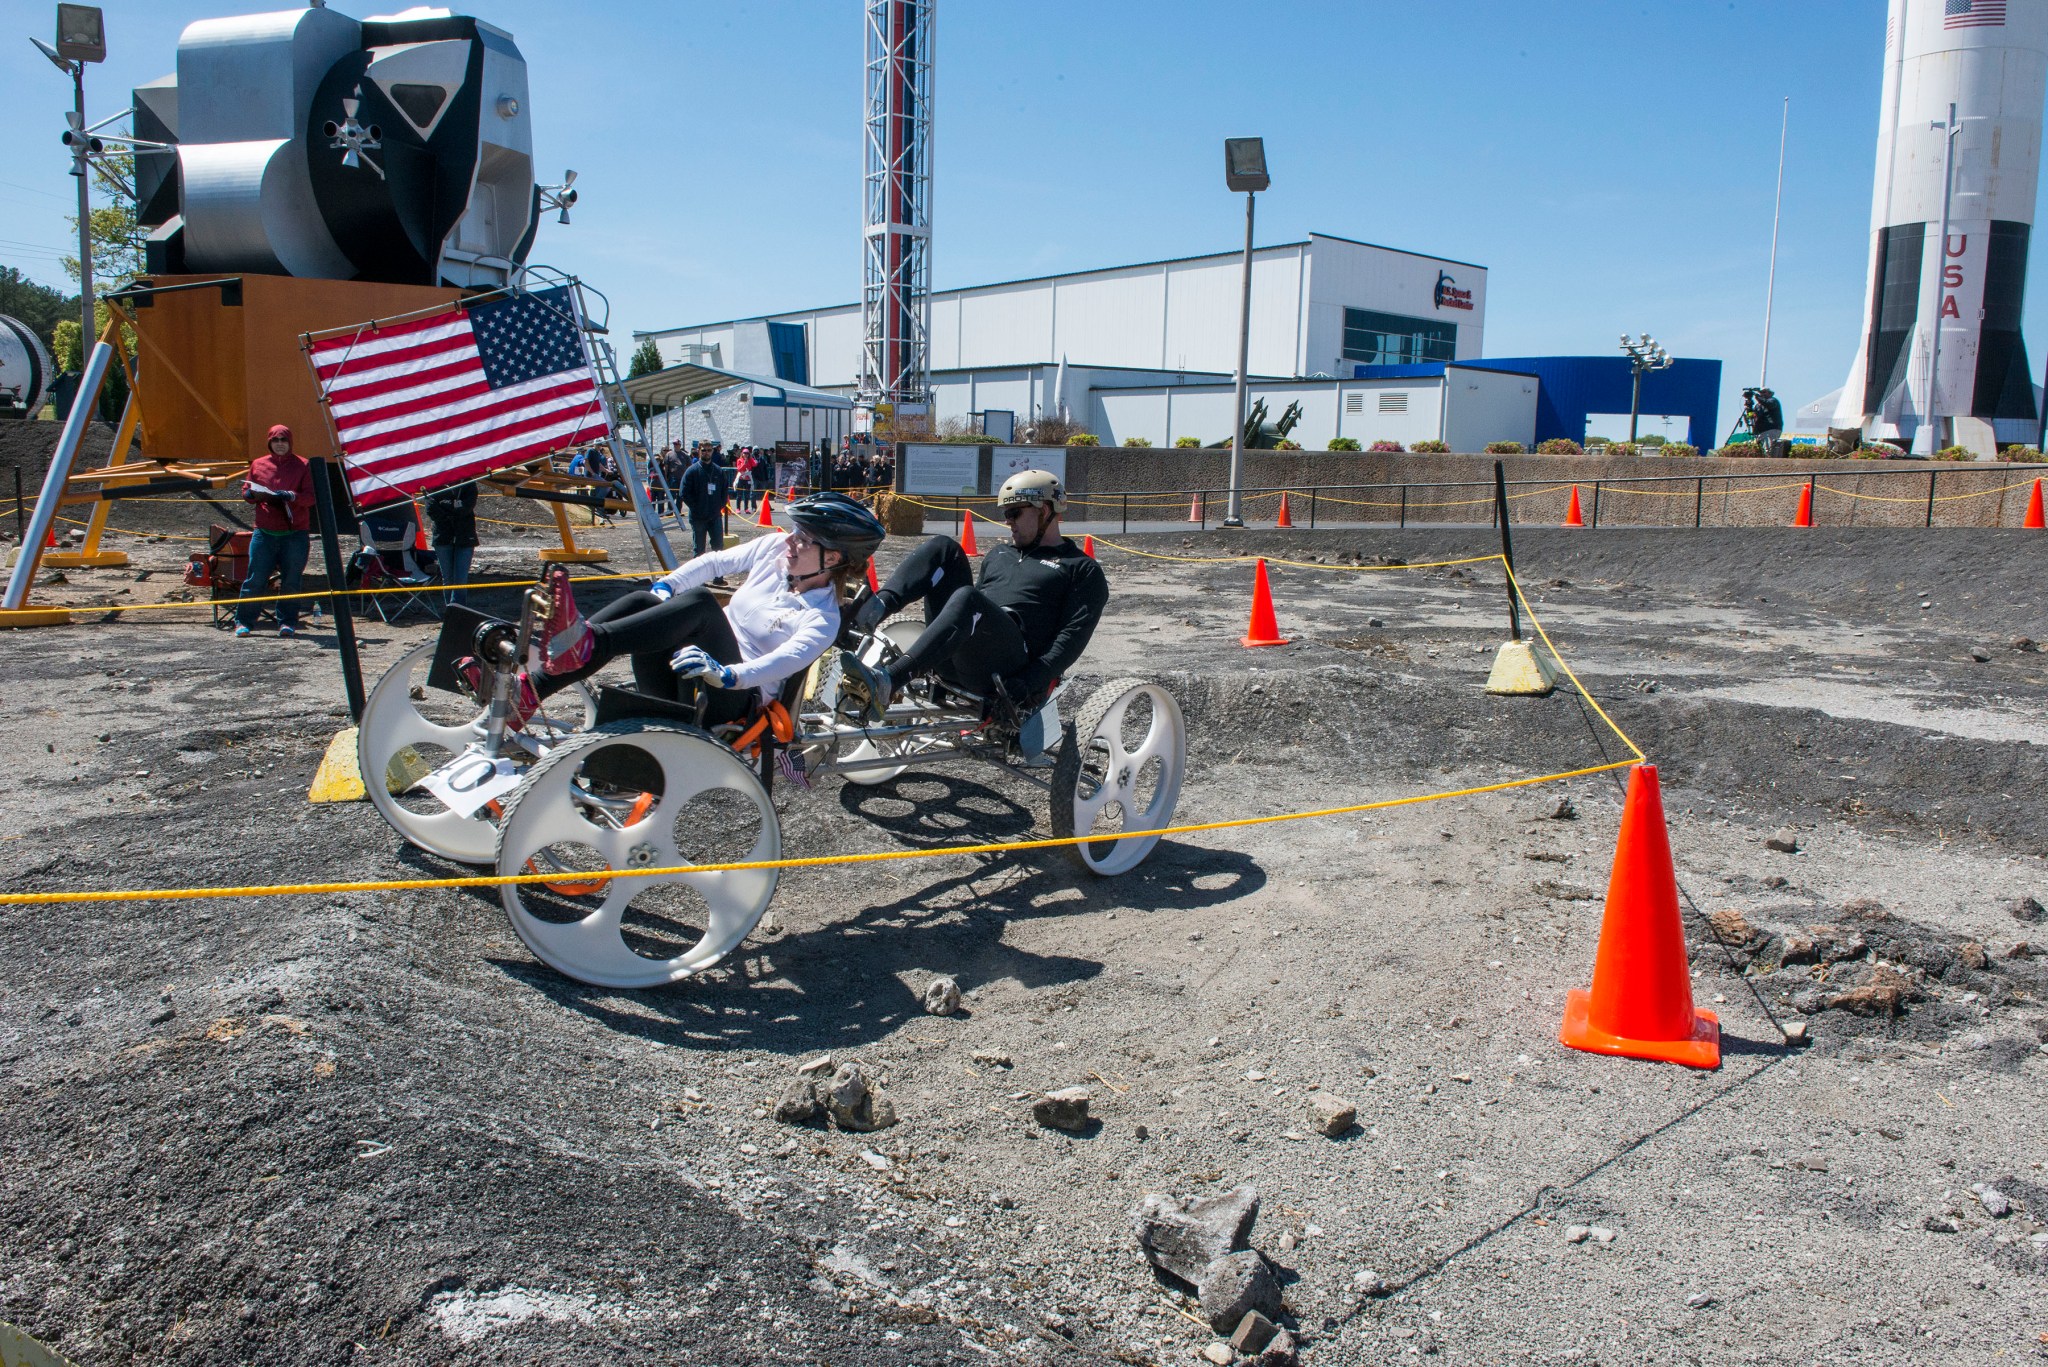 Purdue University Calumet – Team 1 of Hammond, Indiana, won first place in the college division of Rover Challenge